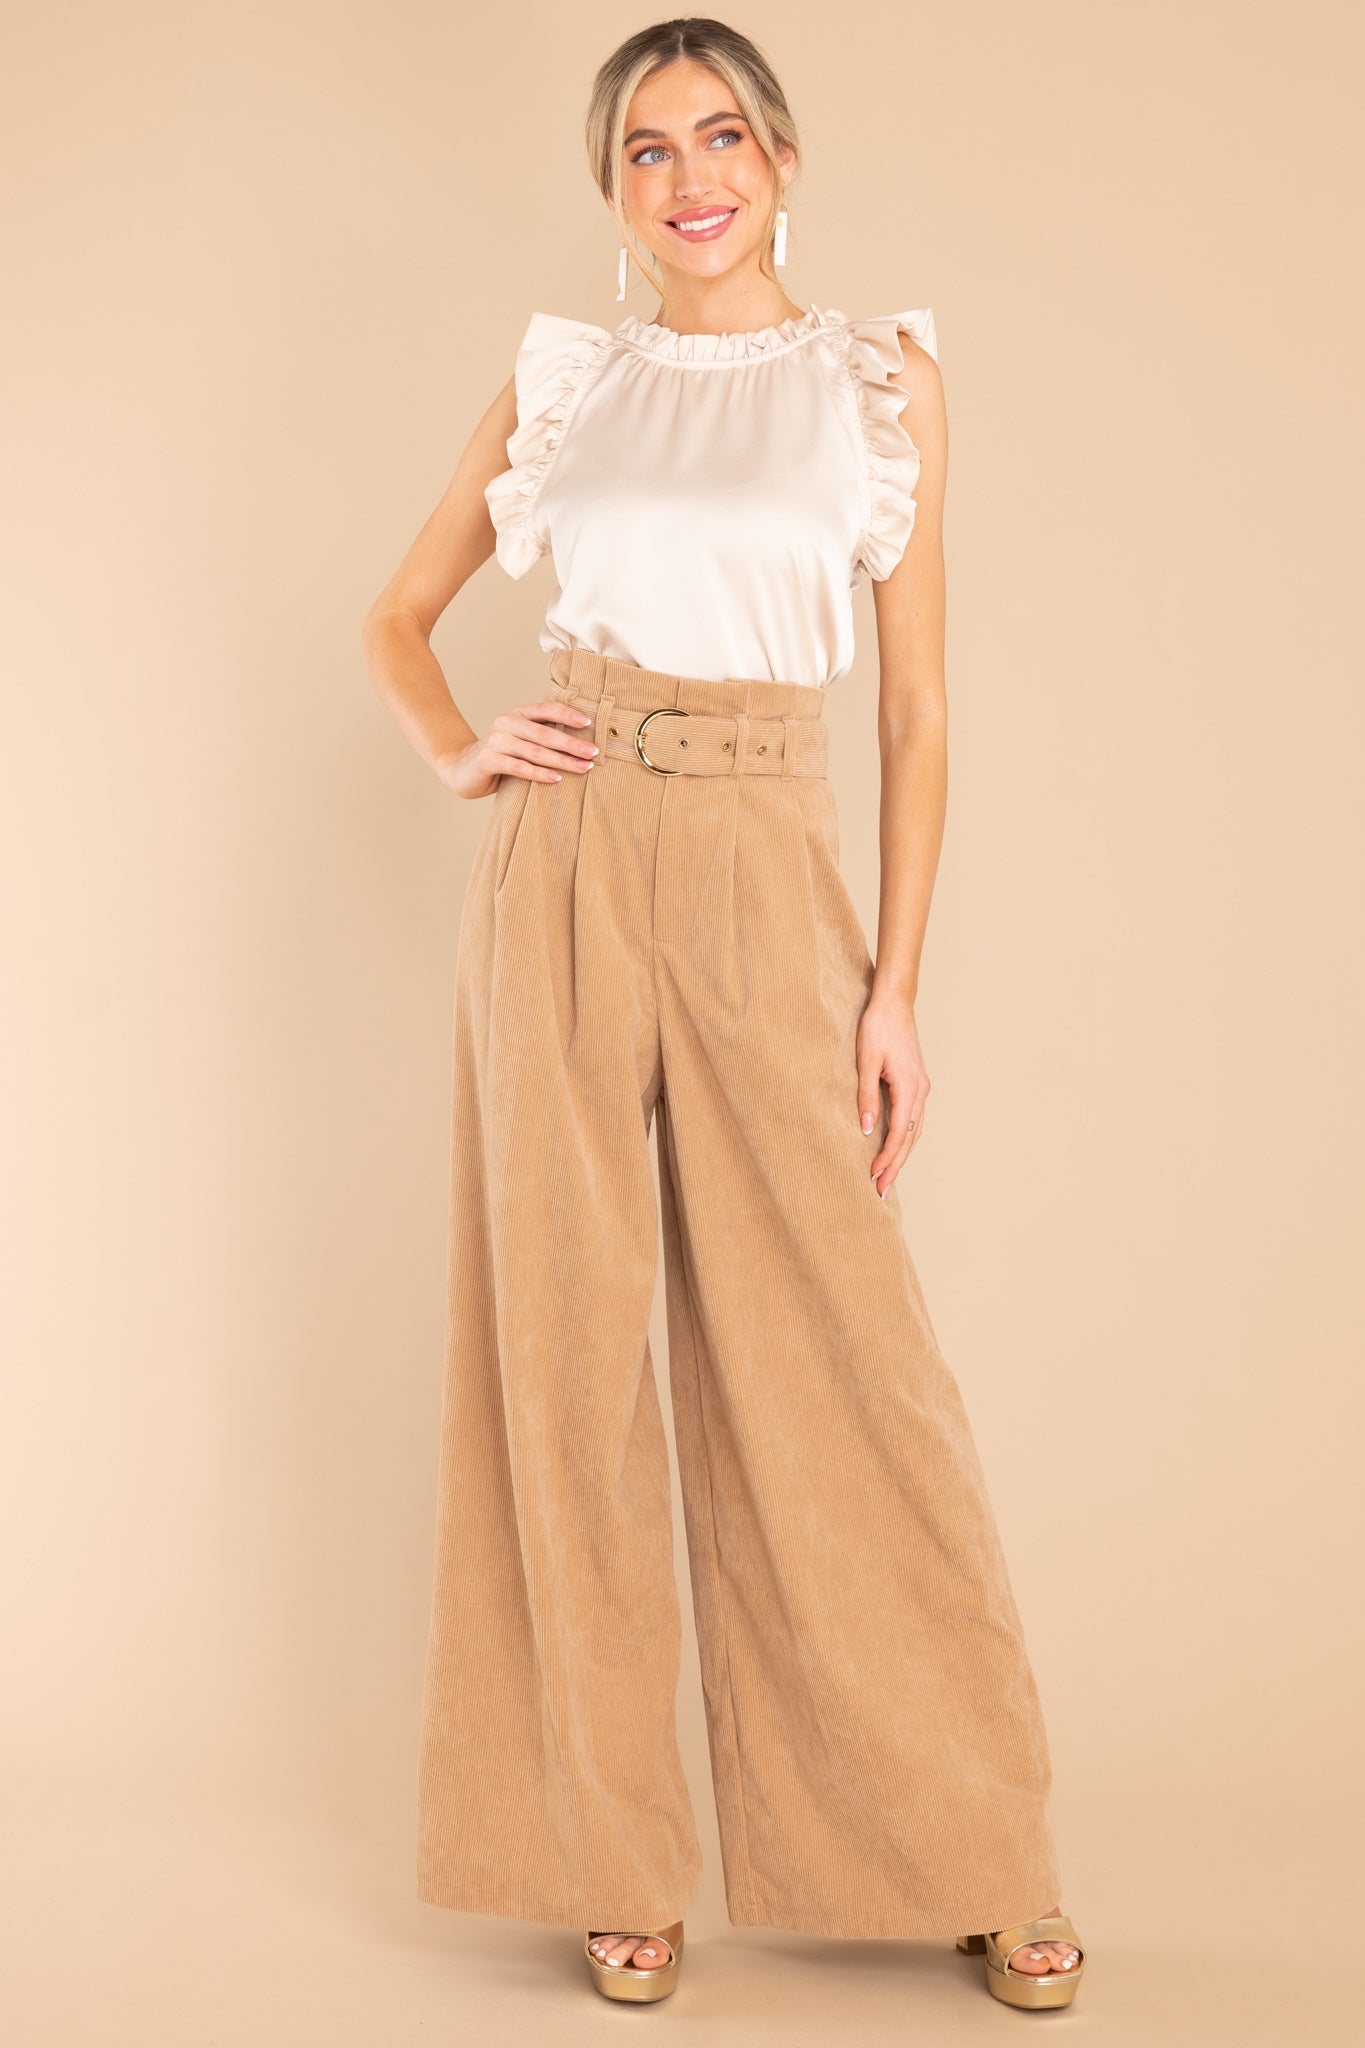 These tan pants feature a paper bag style waistline, an adjustable belt, a zipper closure, and very flowy legs.